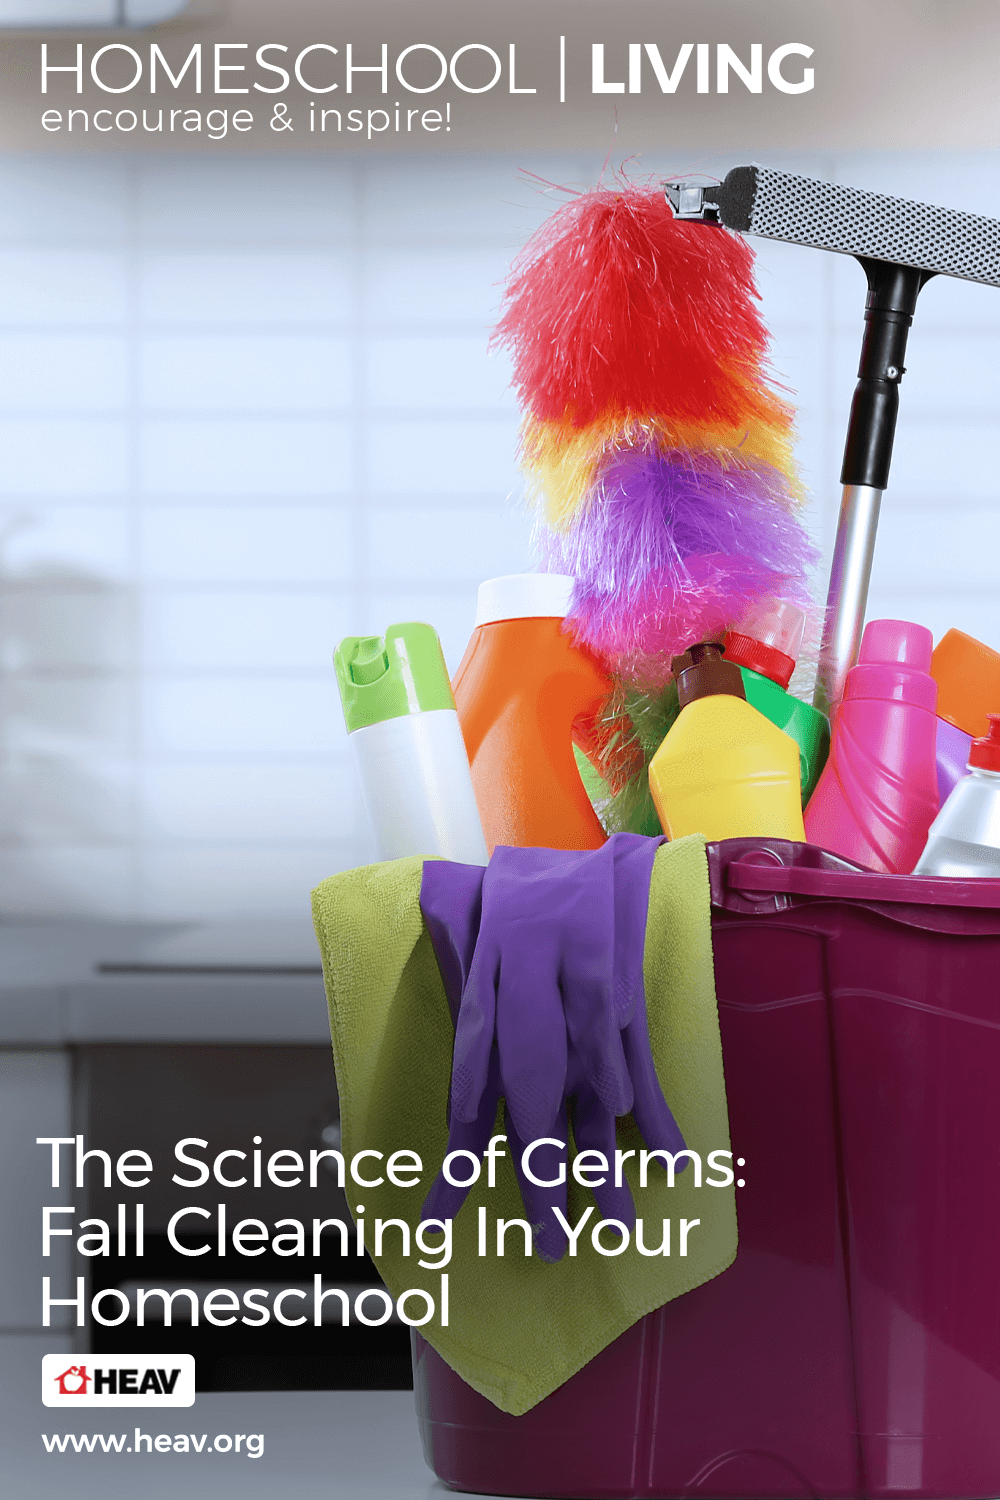 The Science of Germs Fall Cleaning homeschool living pinterest